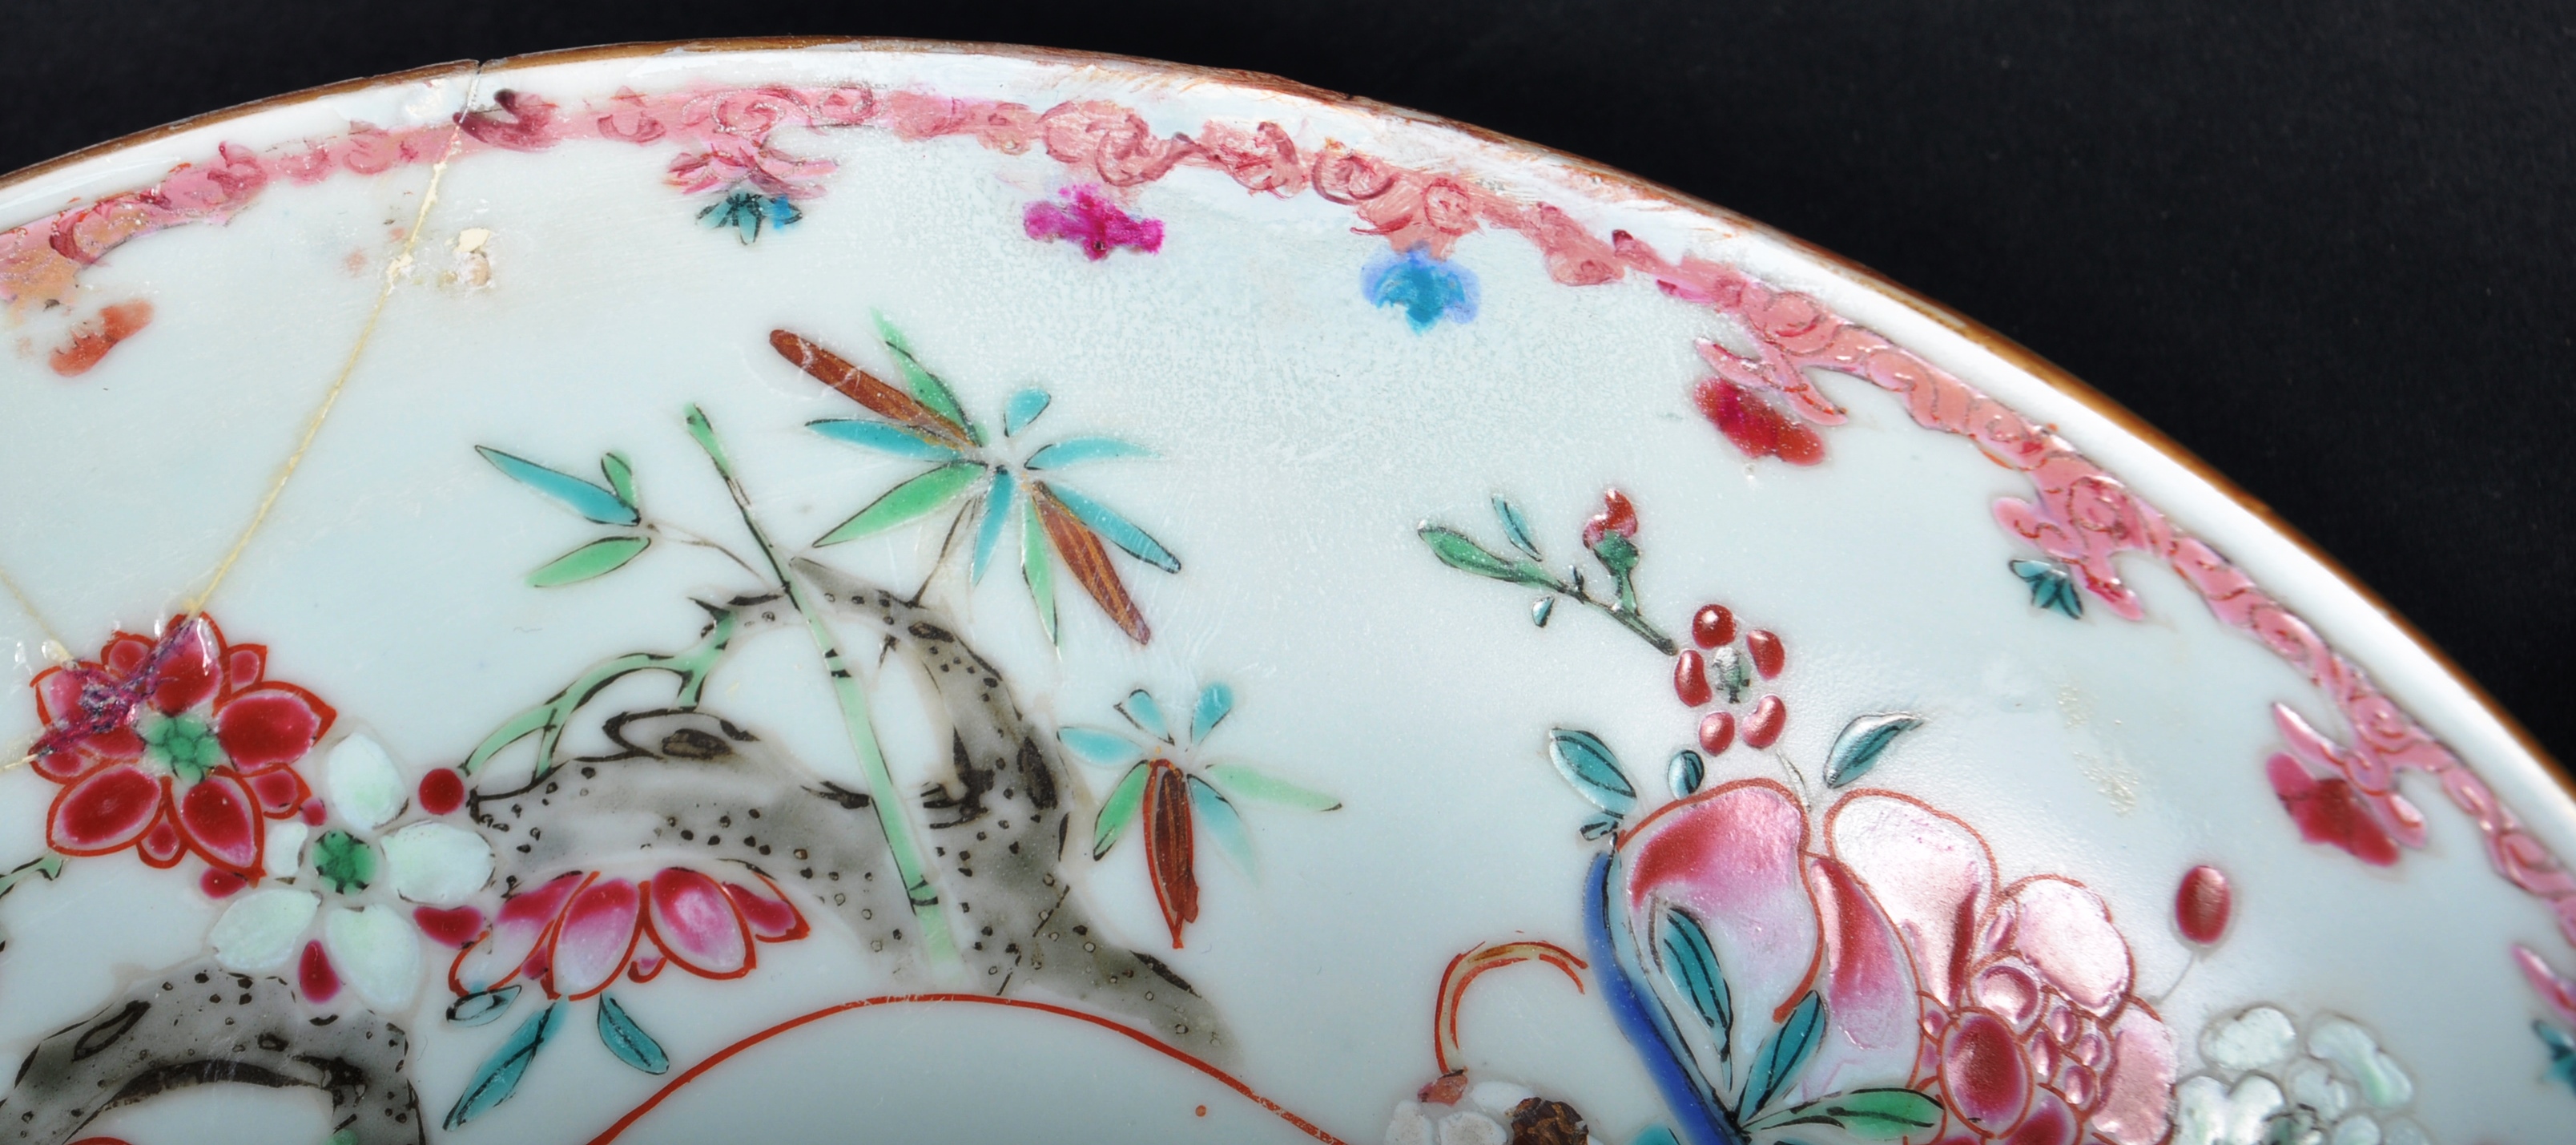 TWO 18TH CENTURY CHINESE QIANLONG PORCELAIN PLATES - Image 9 of 11